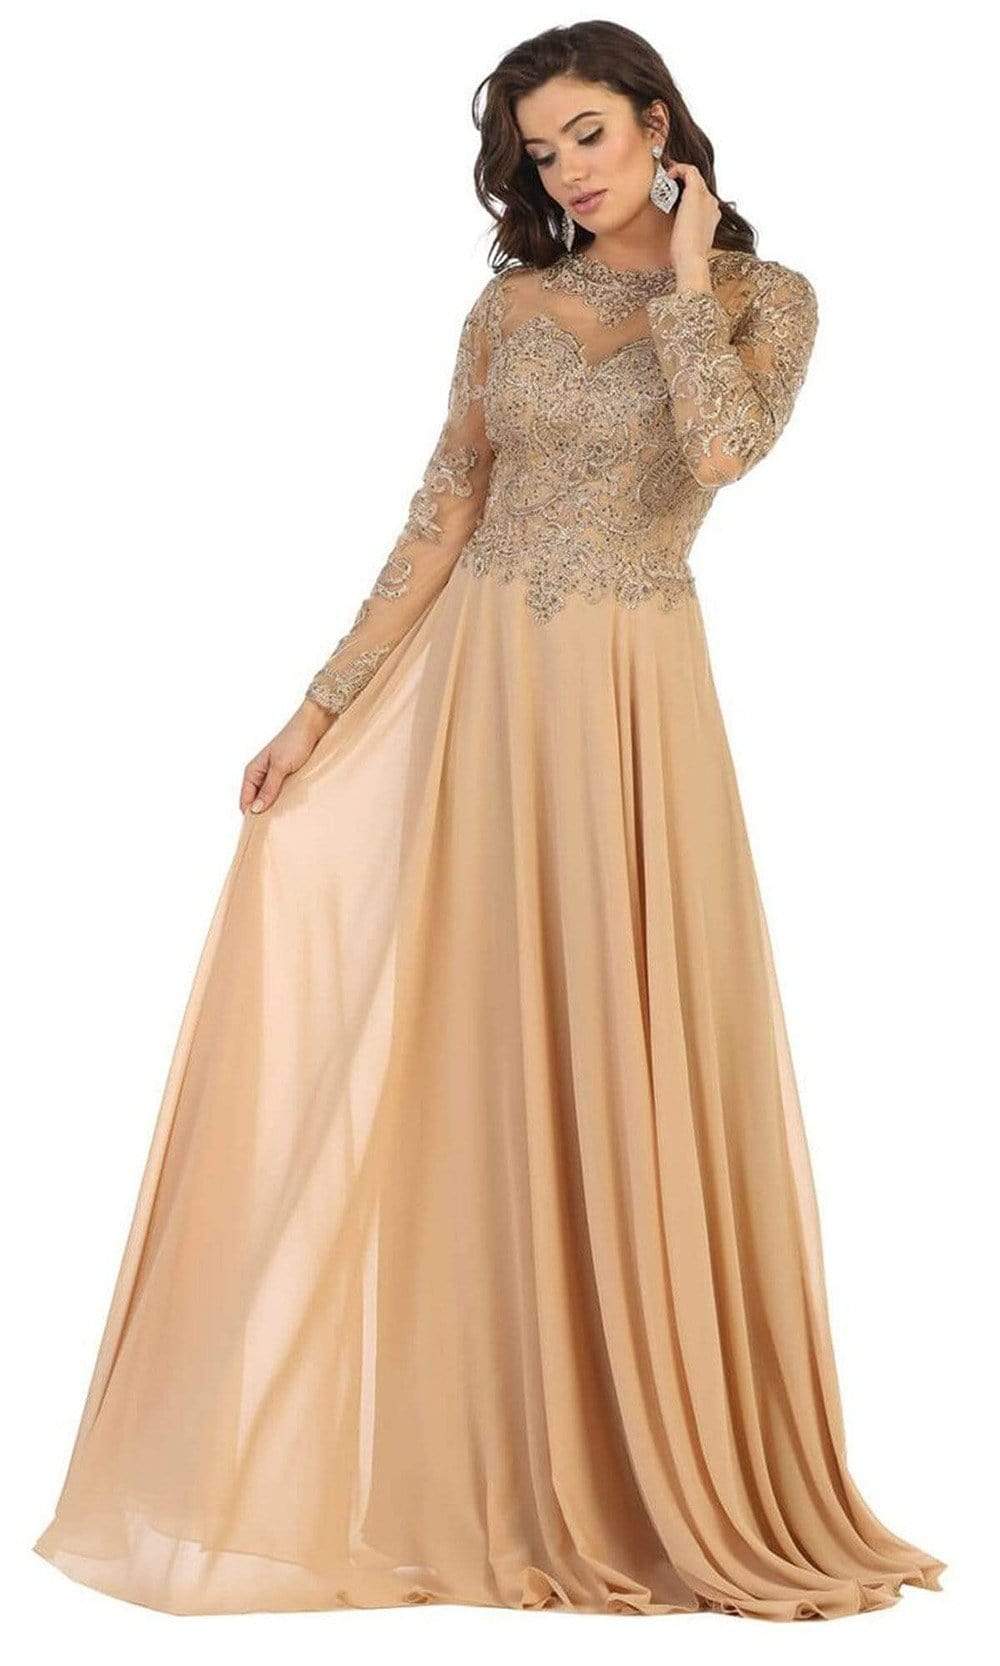 May Queen - RQ7732 Embroidered Long Sleeve Bateau A-line Dress Special Occasion Dress M / Gold